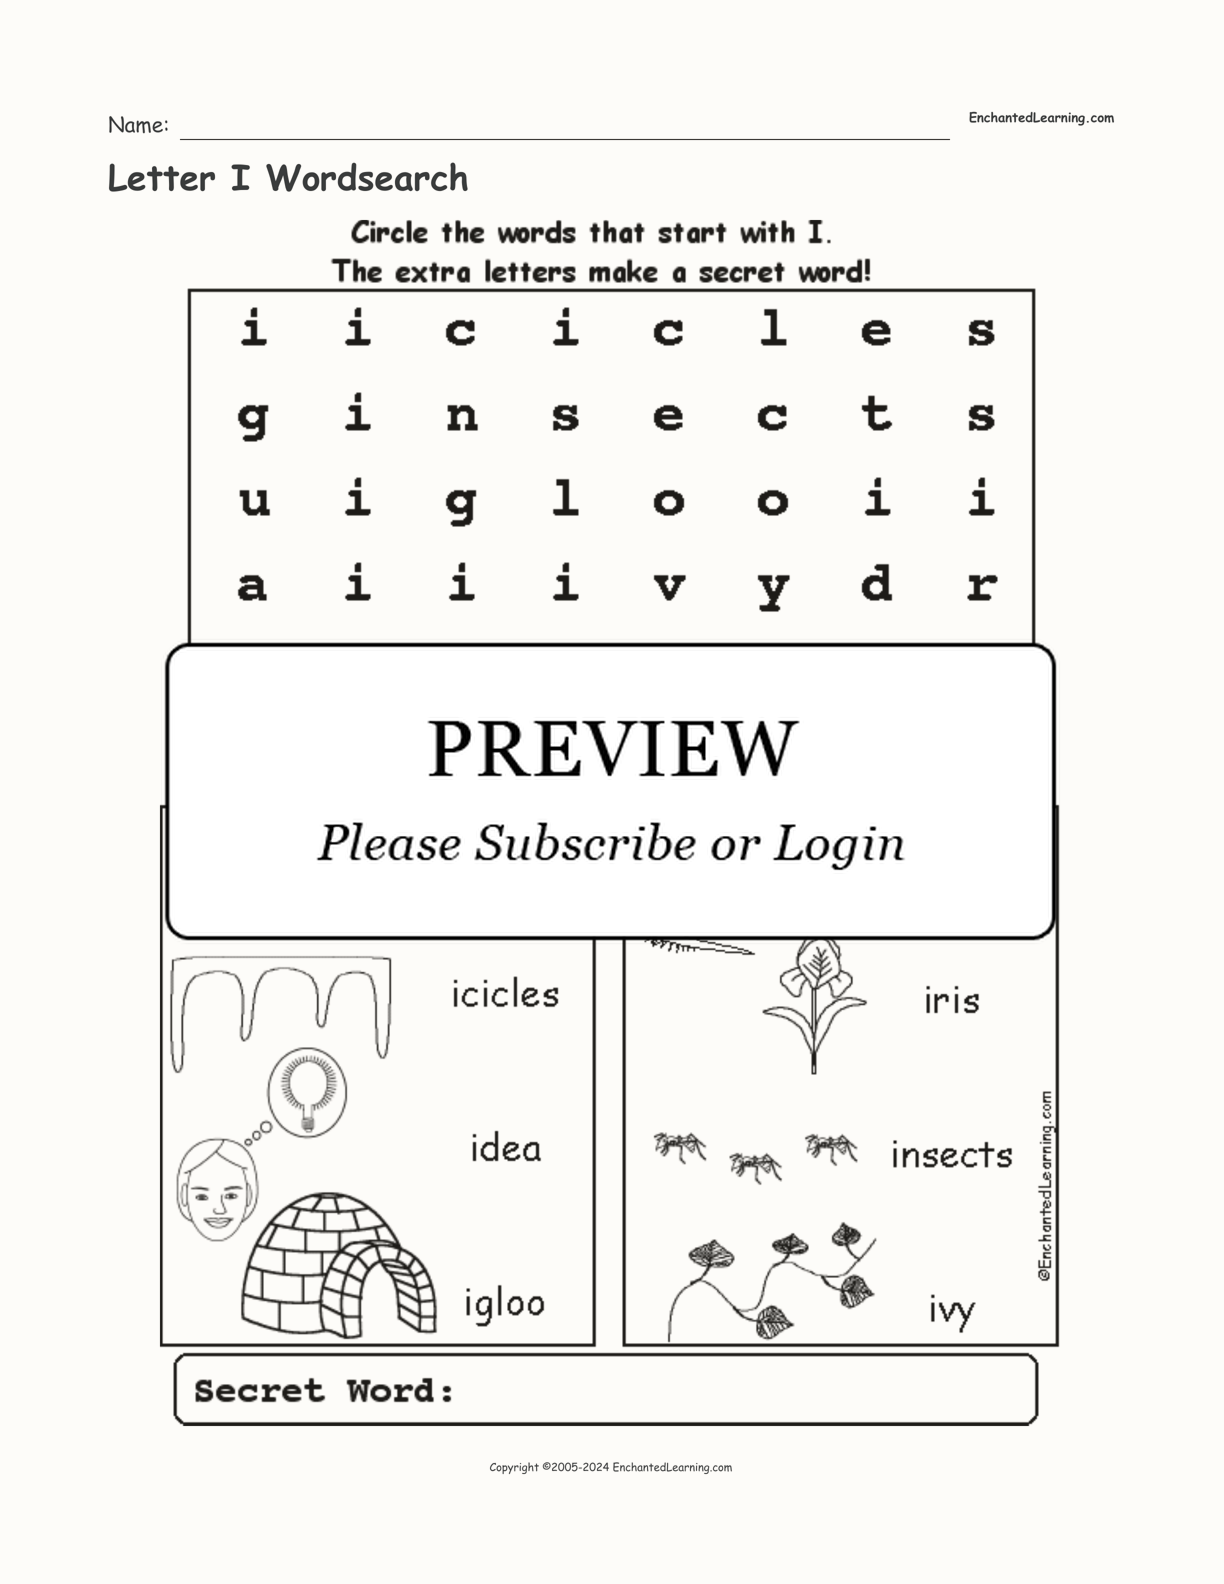 Letter I Wordsearch interactive worksheet page 1